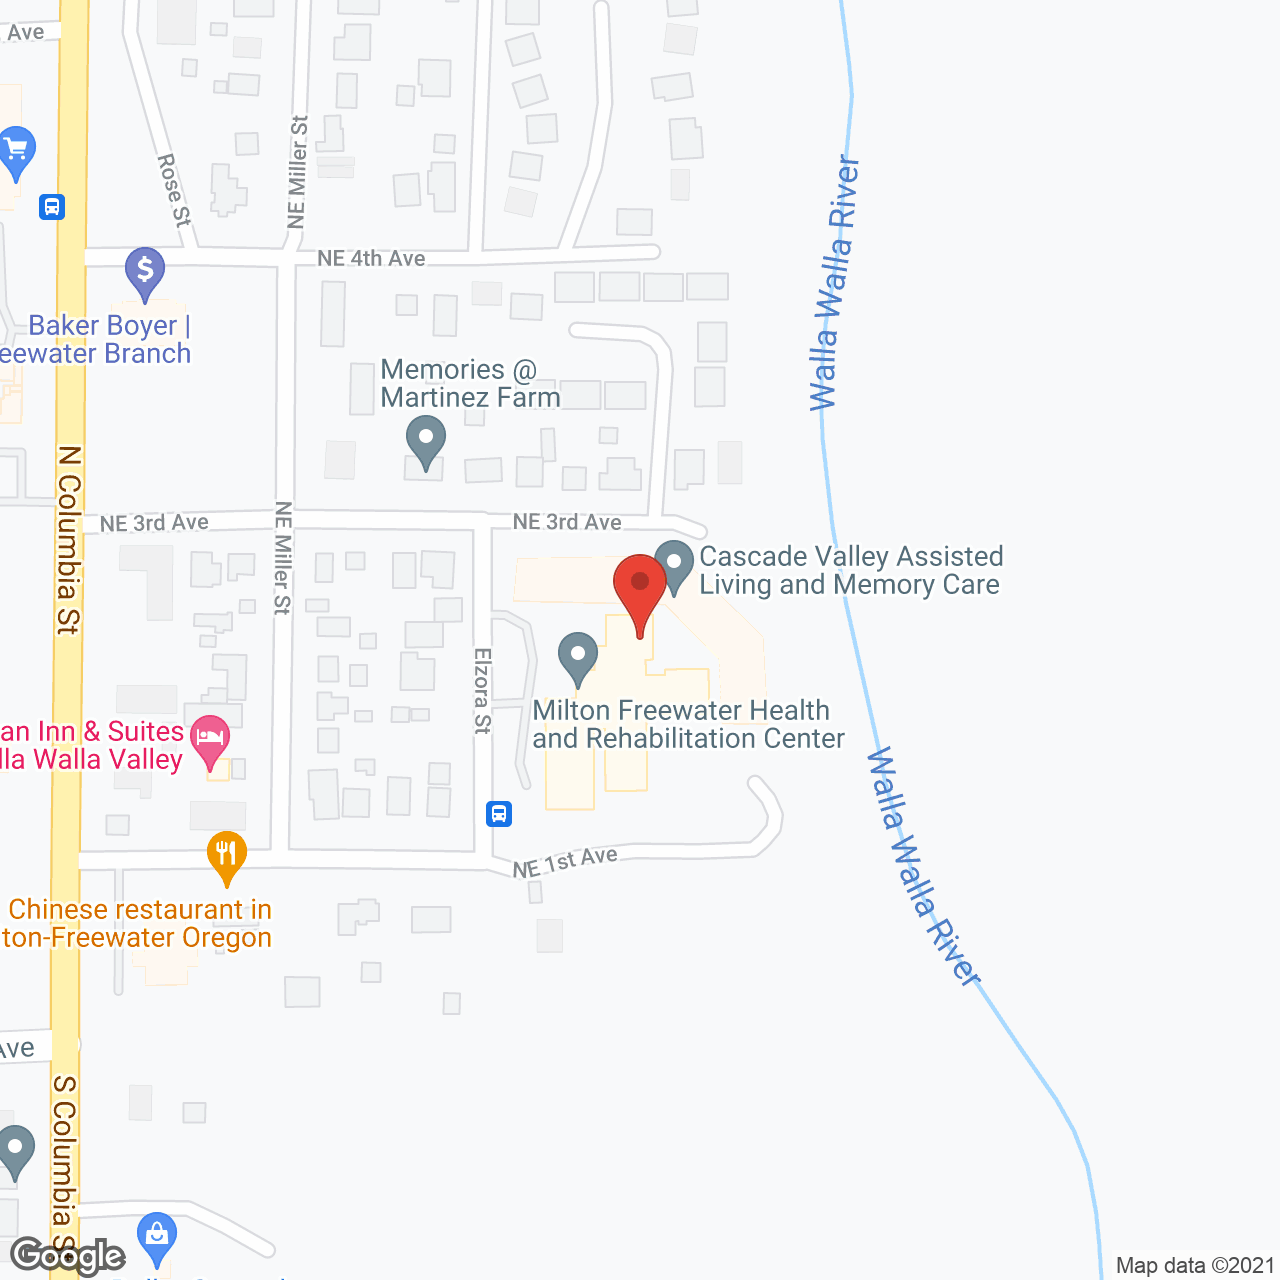 Cascade Valley Assisted Living and Memory Care in google map